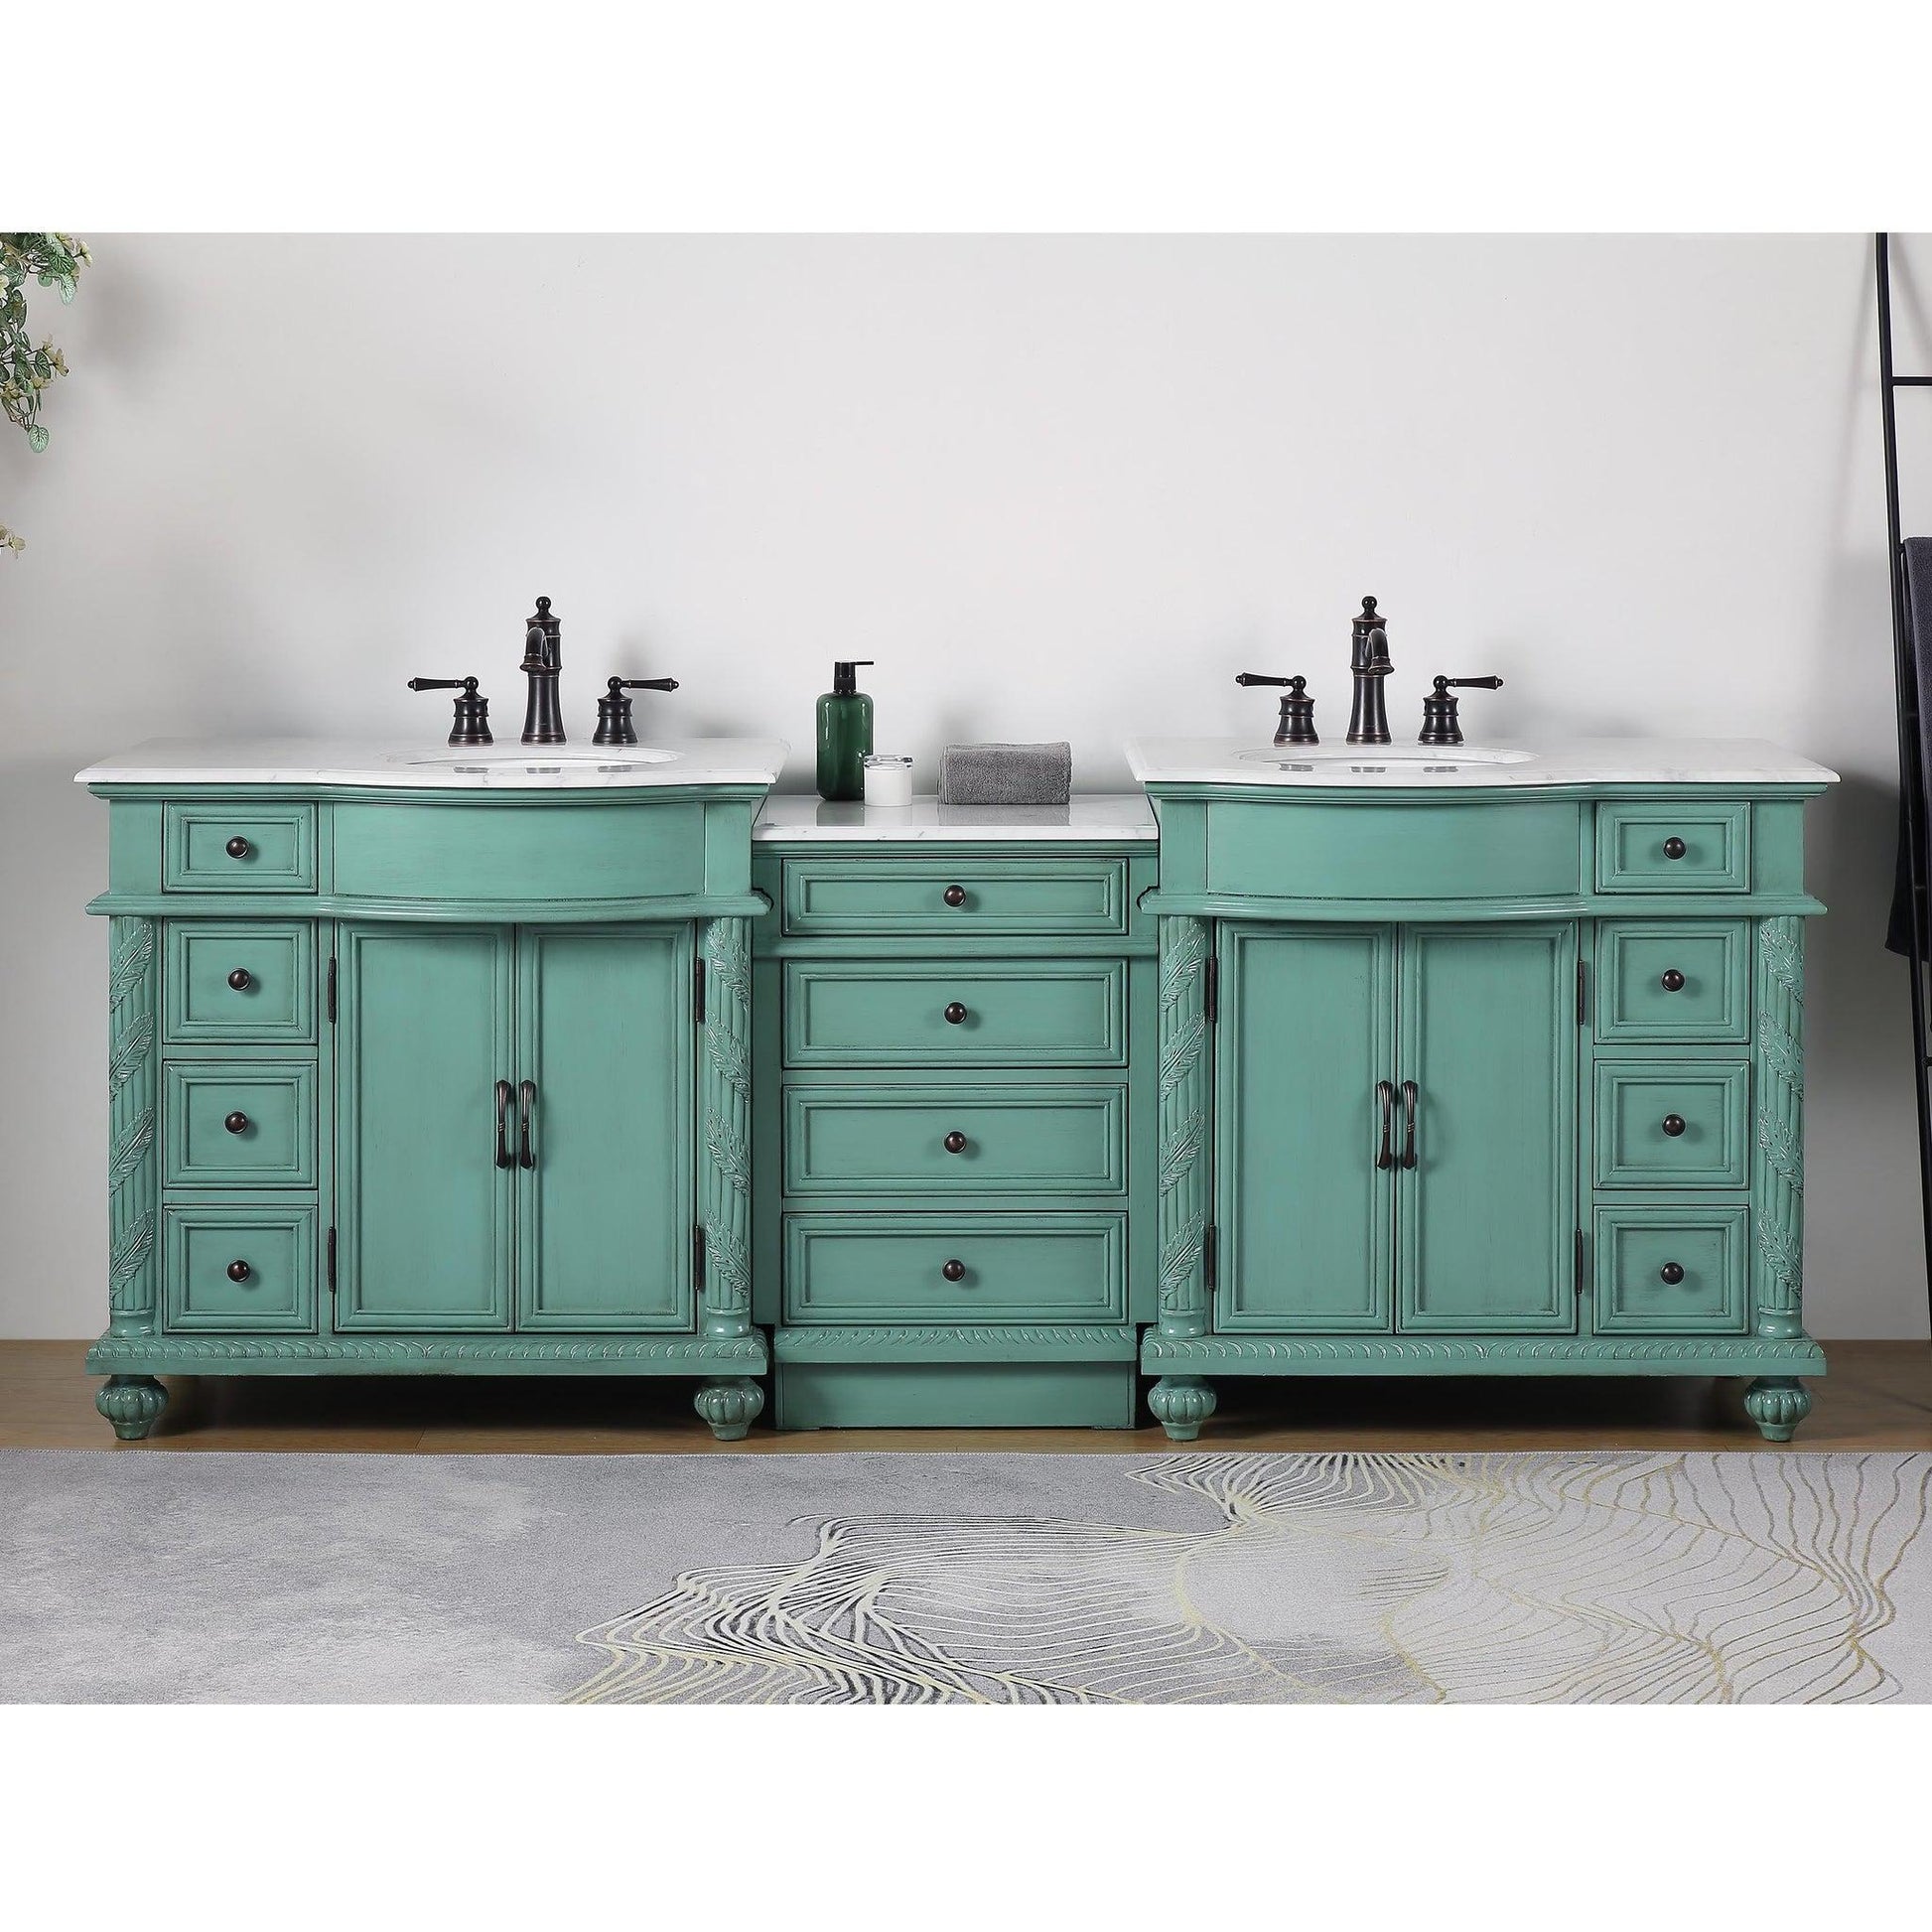 Silkroad Exclusive 90" Double Sink Vintage Green Modular Bathroom Vanity With Carrara White Marble Countertop and White Ceramic Undermount Sink